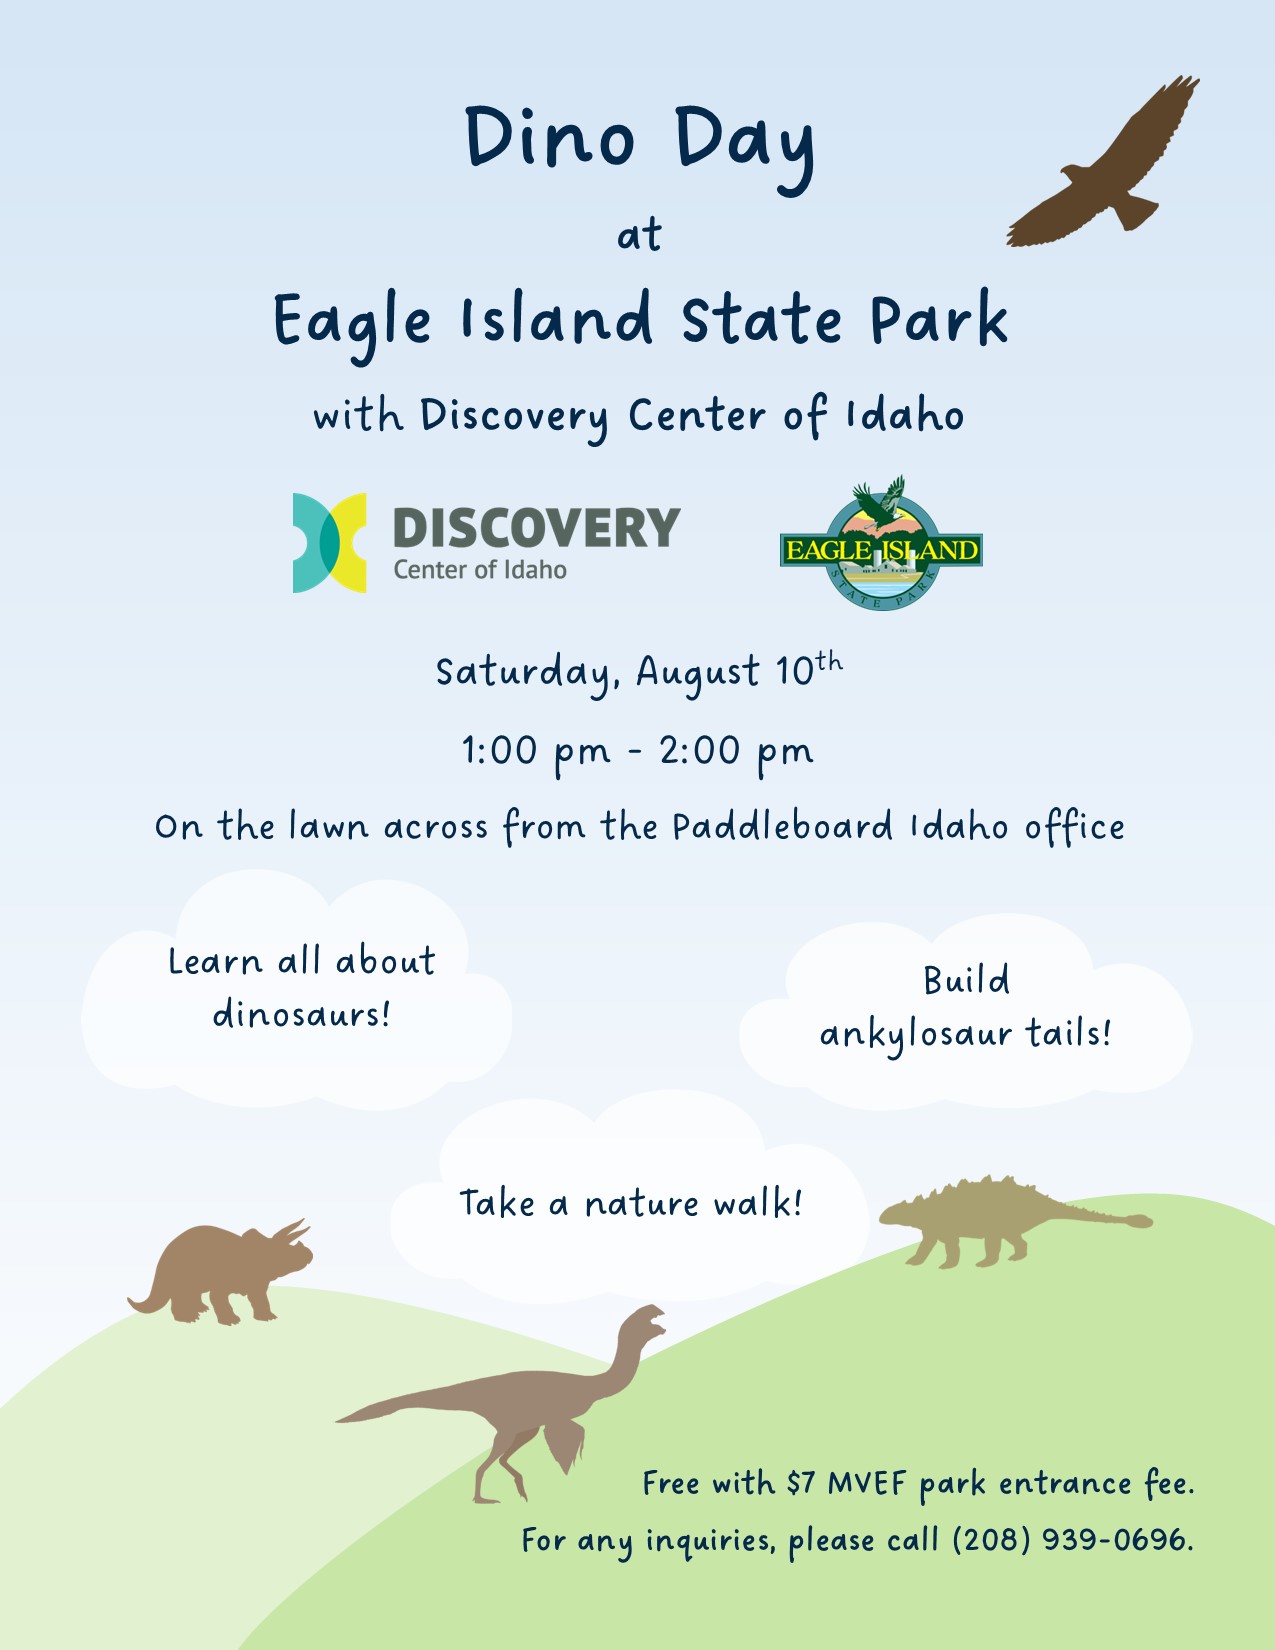 Learn all about dinosaurs! Build ankylosaur tails! Take a nature walk! Meet us on the lawn across from the Paddleboard Idaho office. Eagle, Idaho